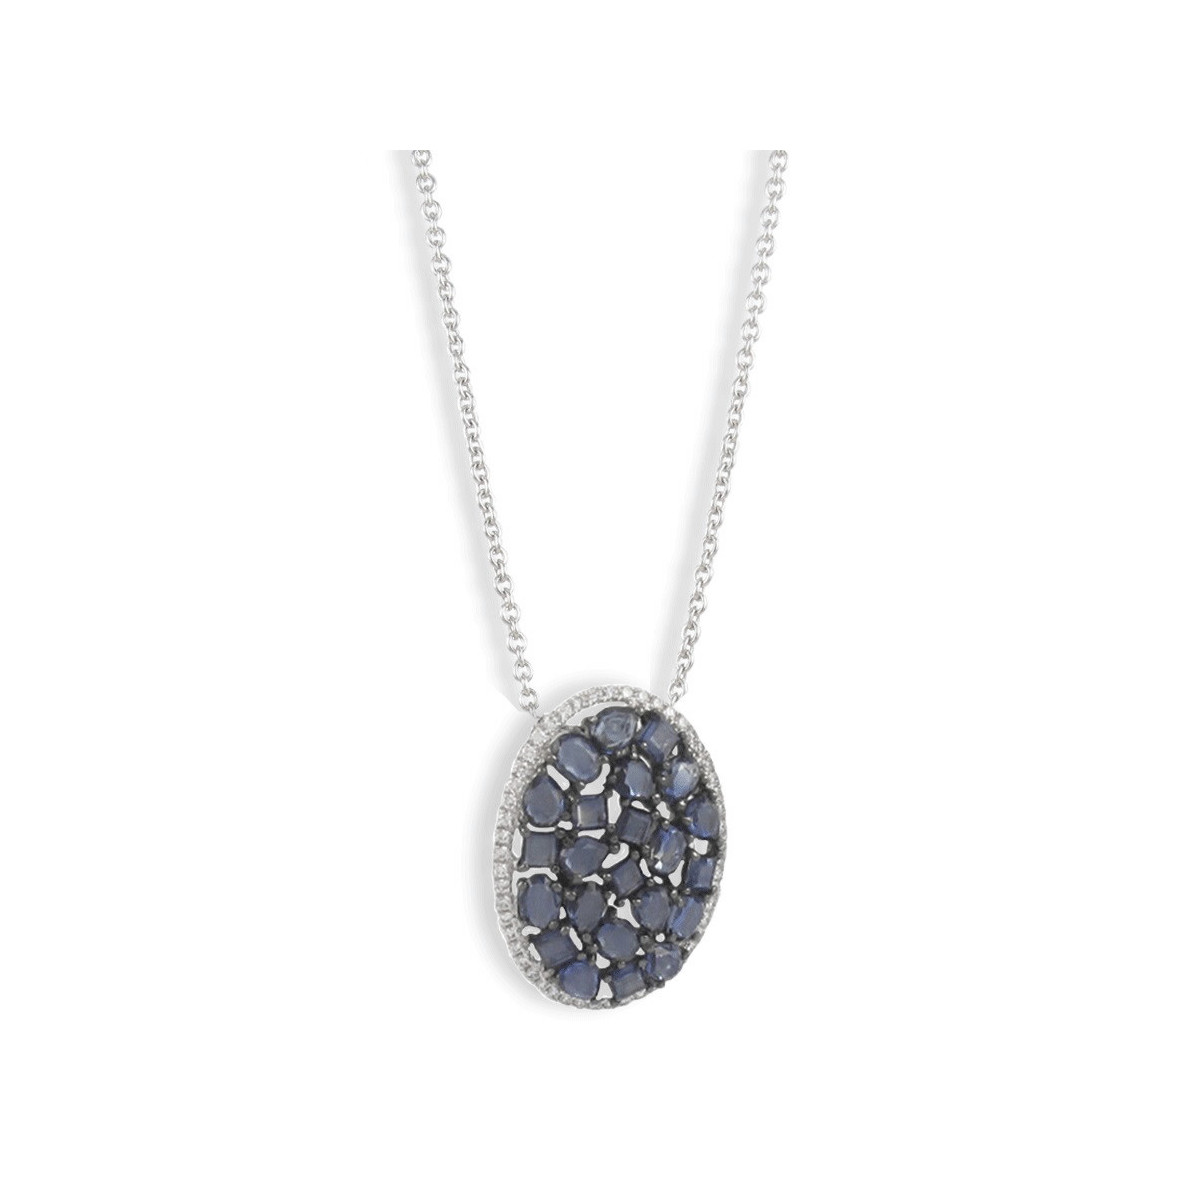 GOLD DIAMOND AND SAPPHIRE NECKLACE